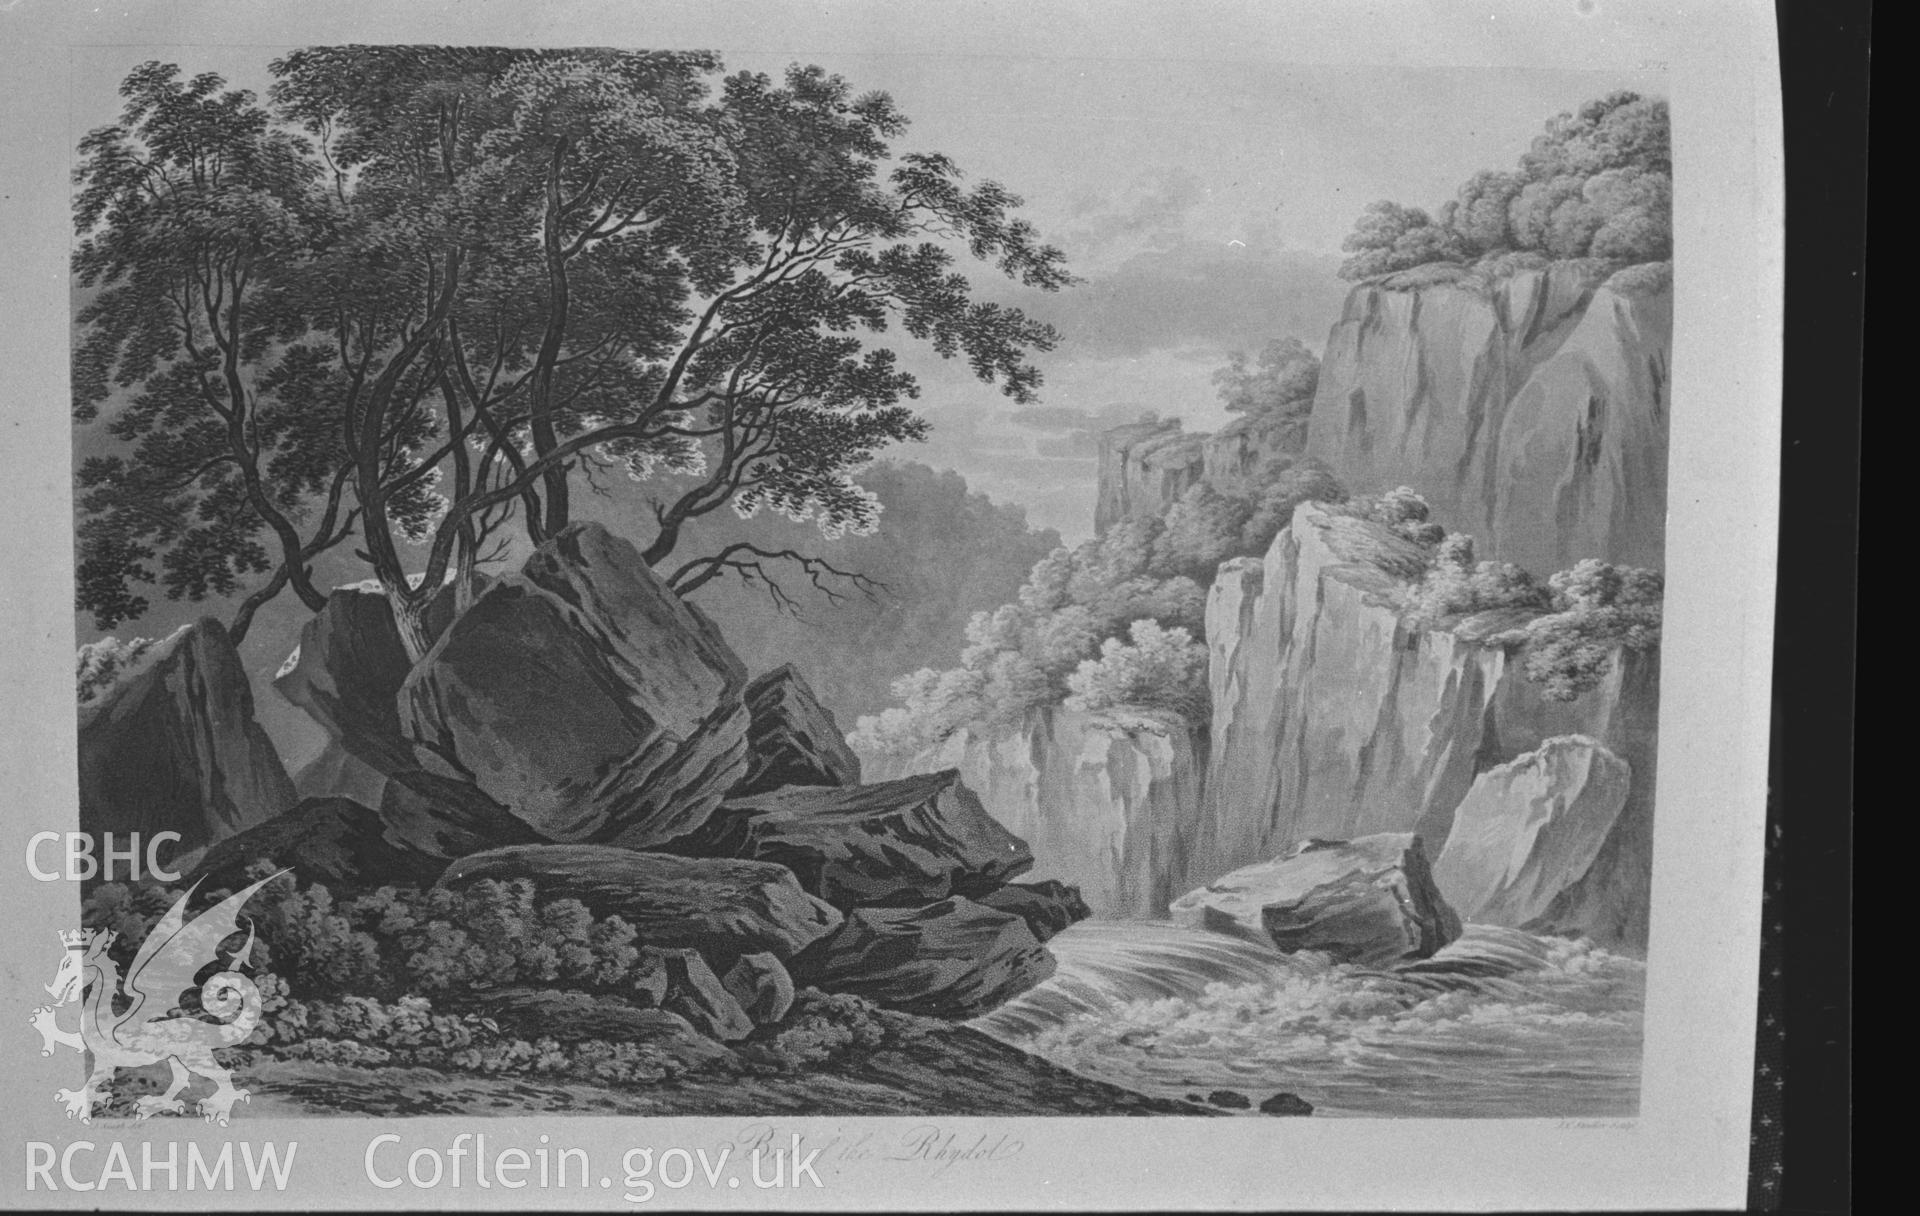 Page illustration of Hafod Uchtryd: 'Bed of the Rydol' - photographed from 'Fifteen views illustrative of a tour to Hafod in Cardiganshire' by J. E. Smith (1810). Photographed by Arthur O. Chater in January 1968 for his own private research.